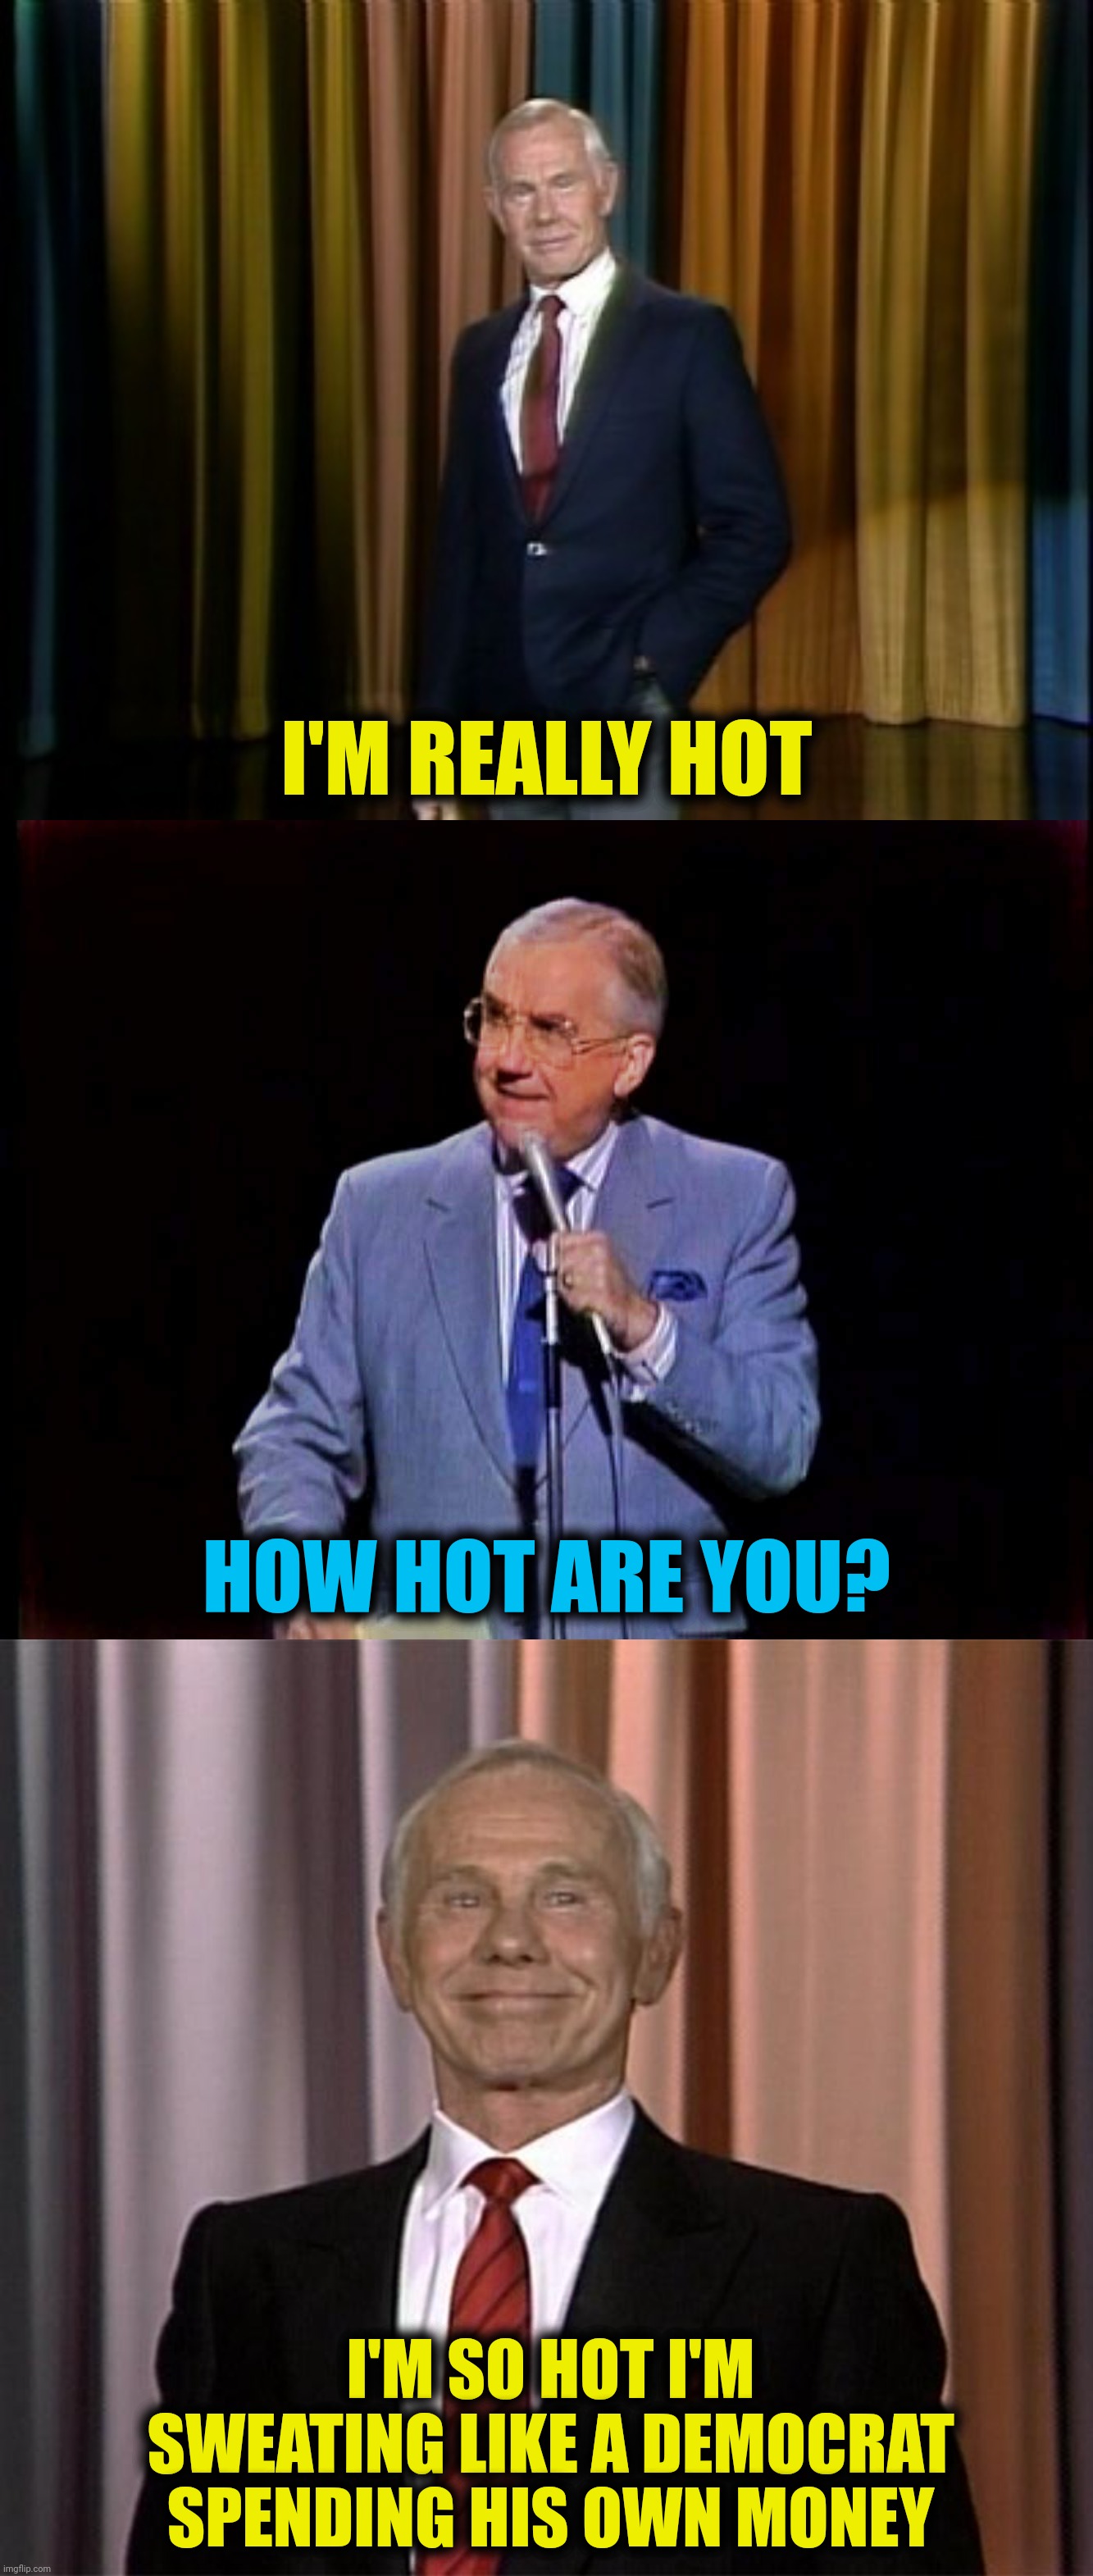 I'M REALLY HOT I'M SO HOT I'M SWEATING LIKE A DEMOCRAT SPENDING HIS OWN MONEY HOW HOT ARE YOU? | made w/ Imgflip meme maker